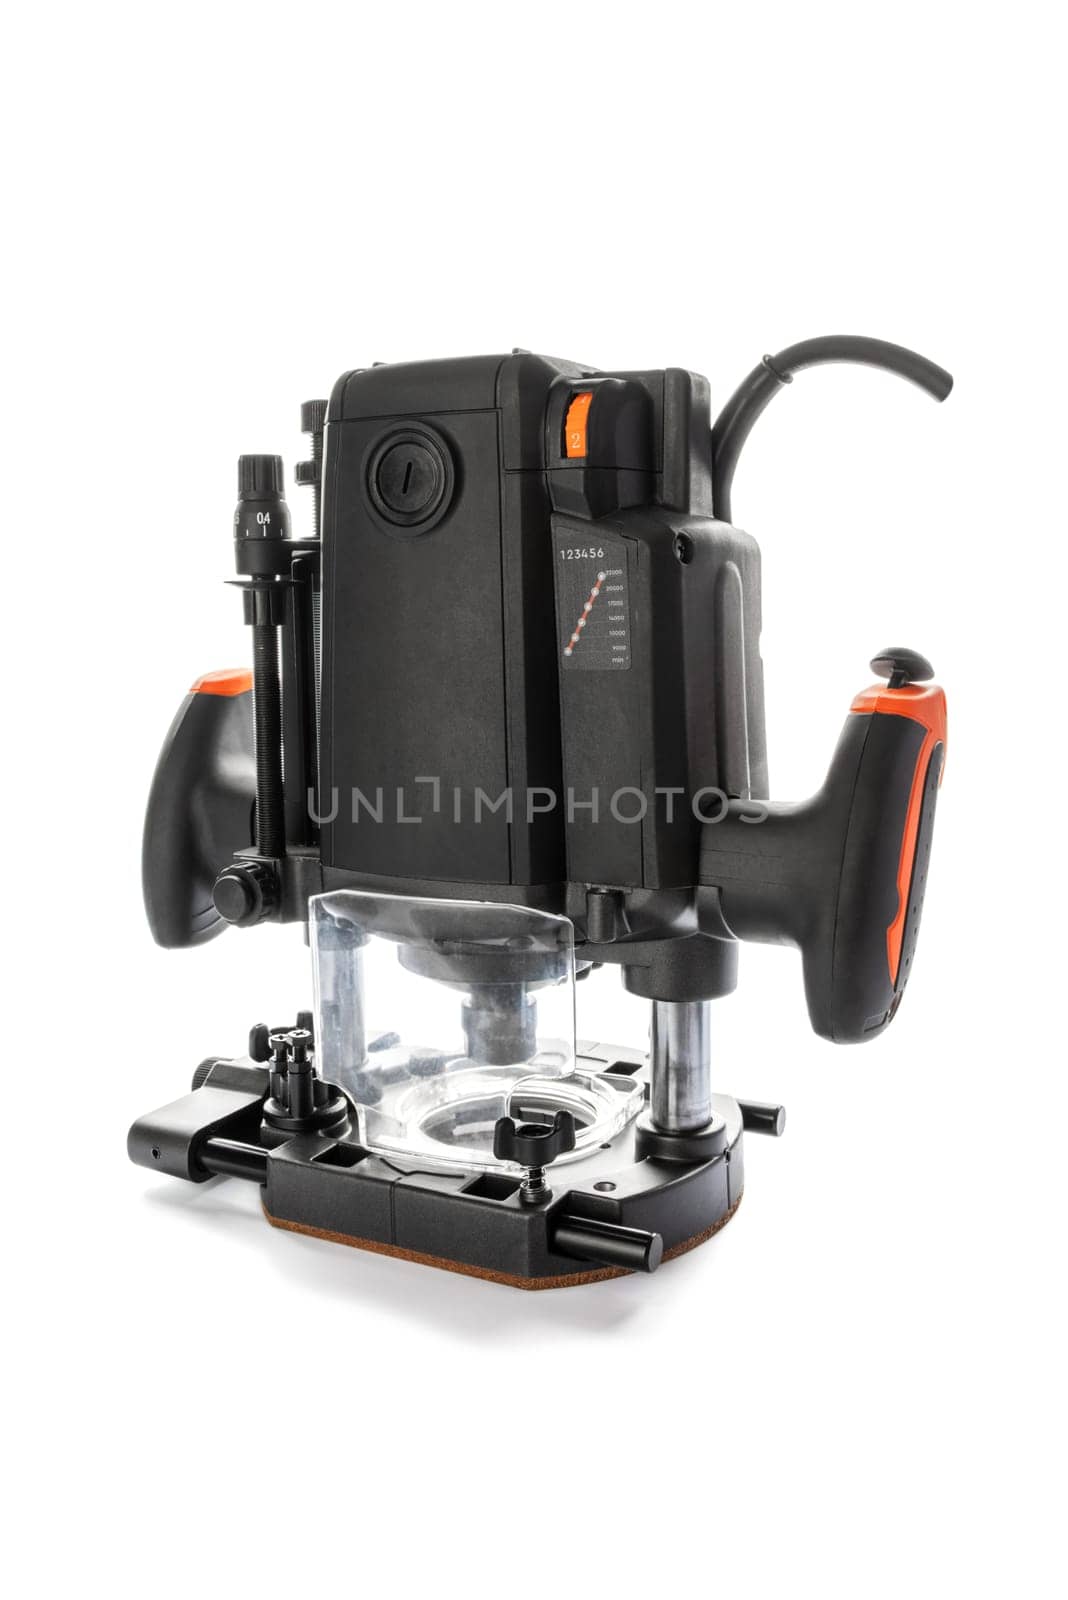 Portable black electric wood router machine isolated on white background. Carpentry construction diy concept